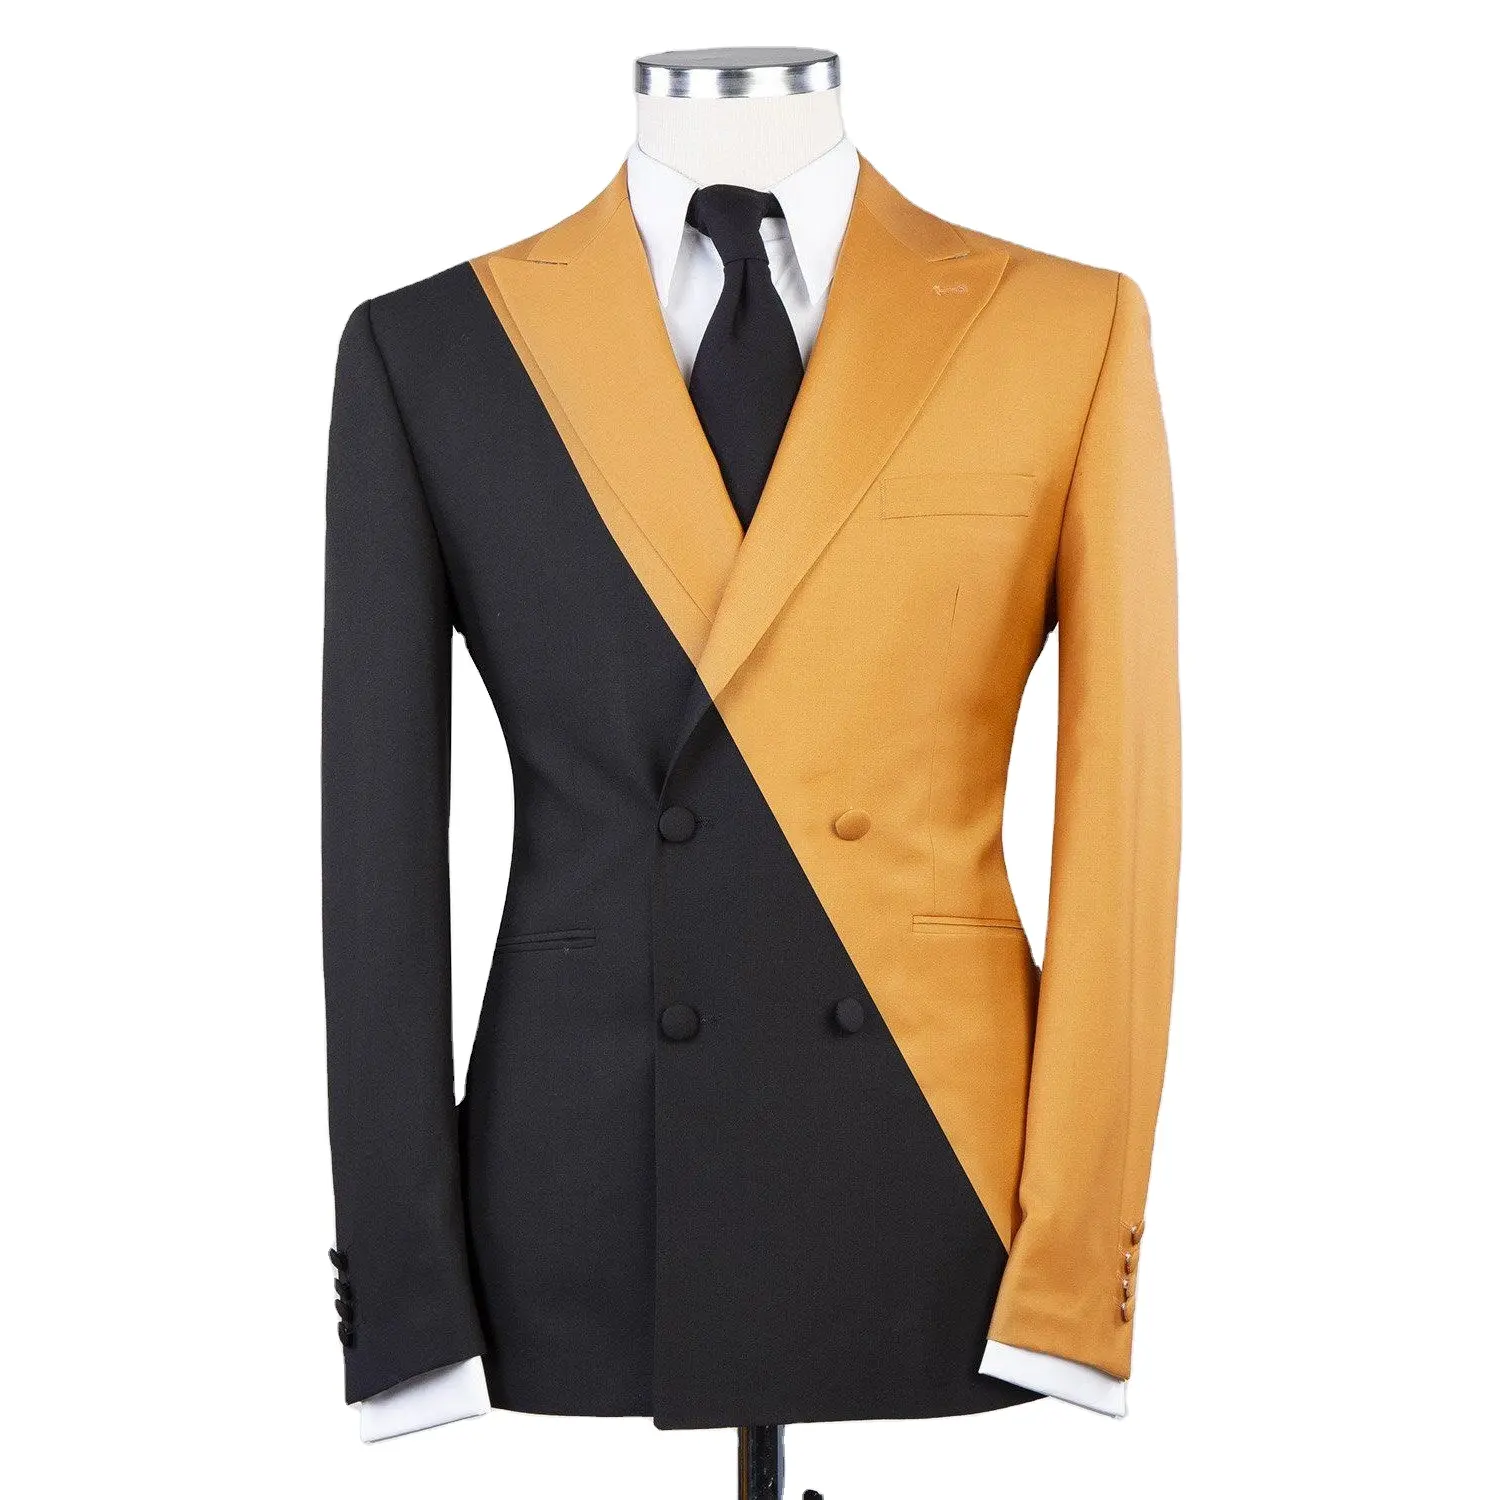 Orange and Black mirrored double Contrast Color Men Suits 3 Pieces Casual for Wedding Groomsmen